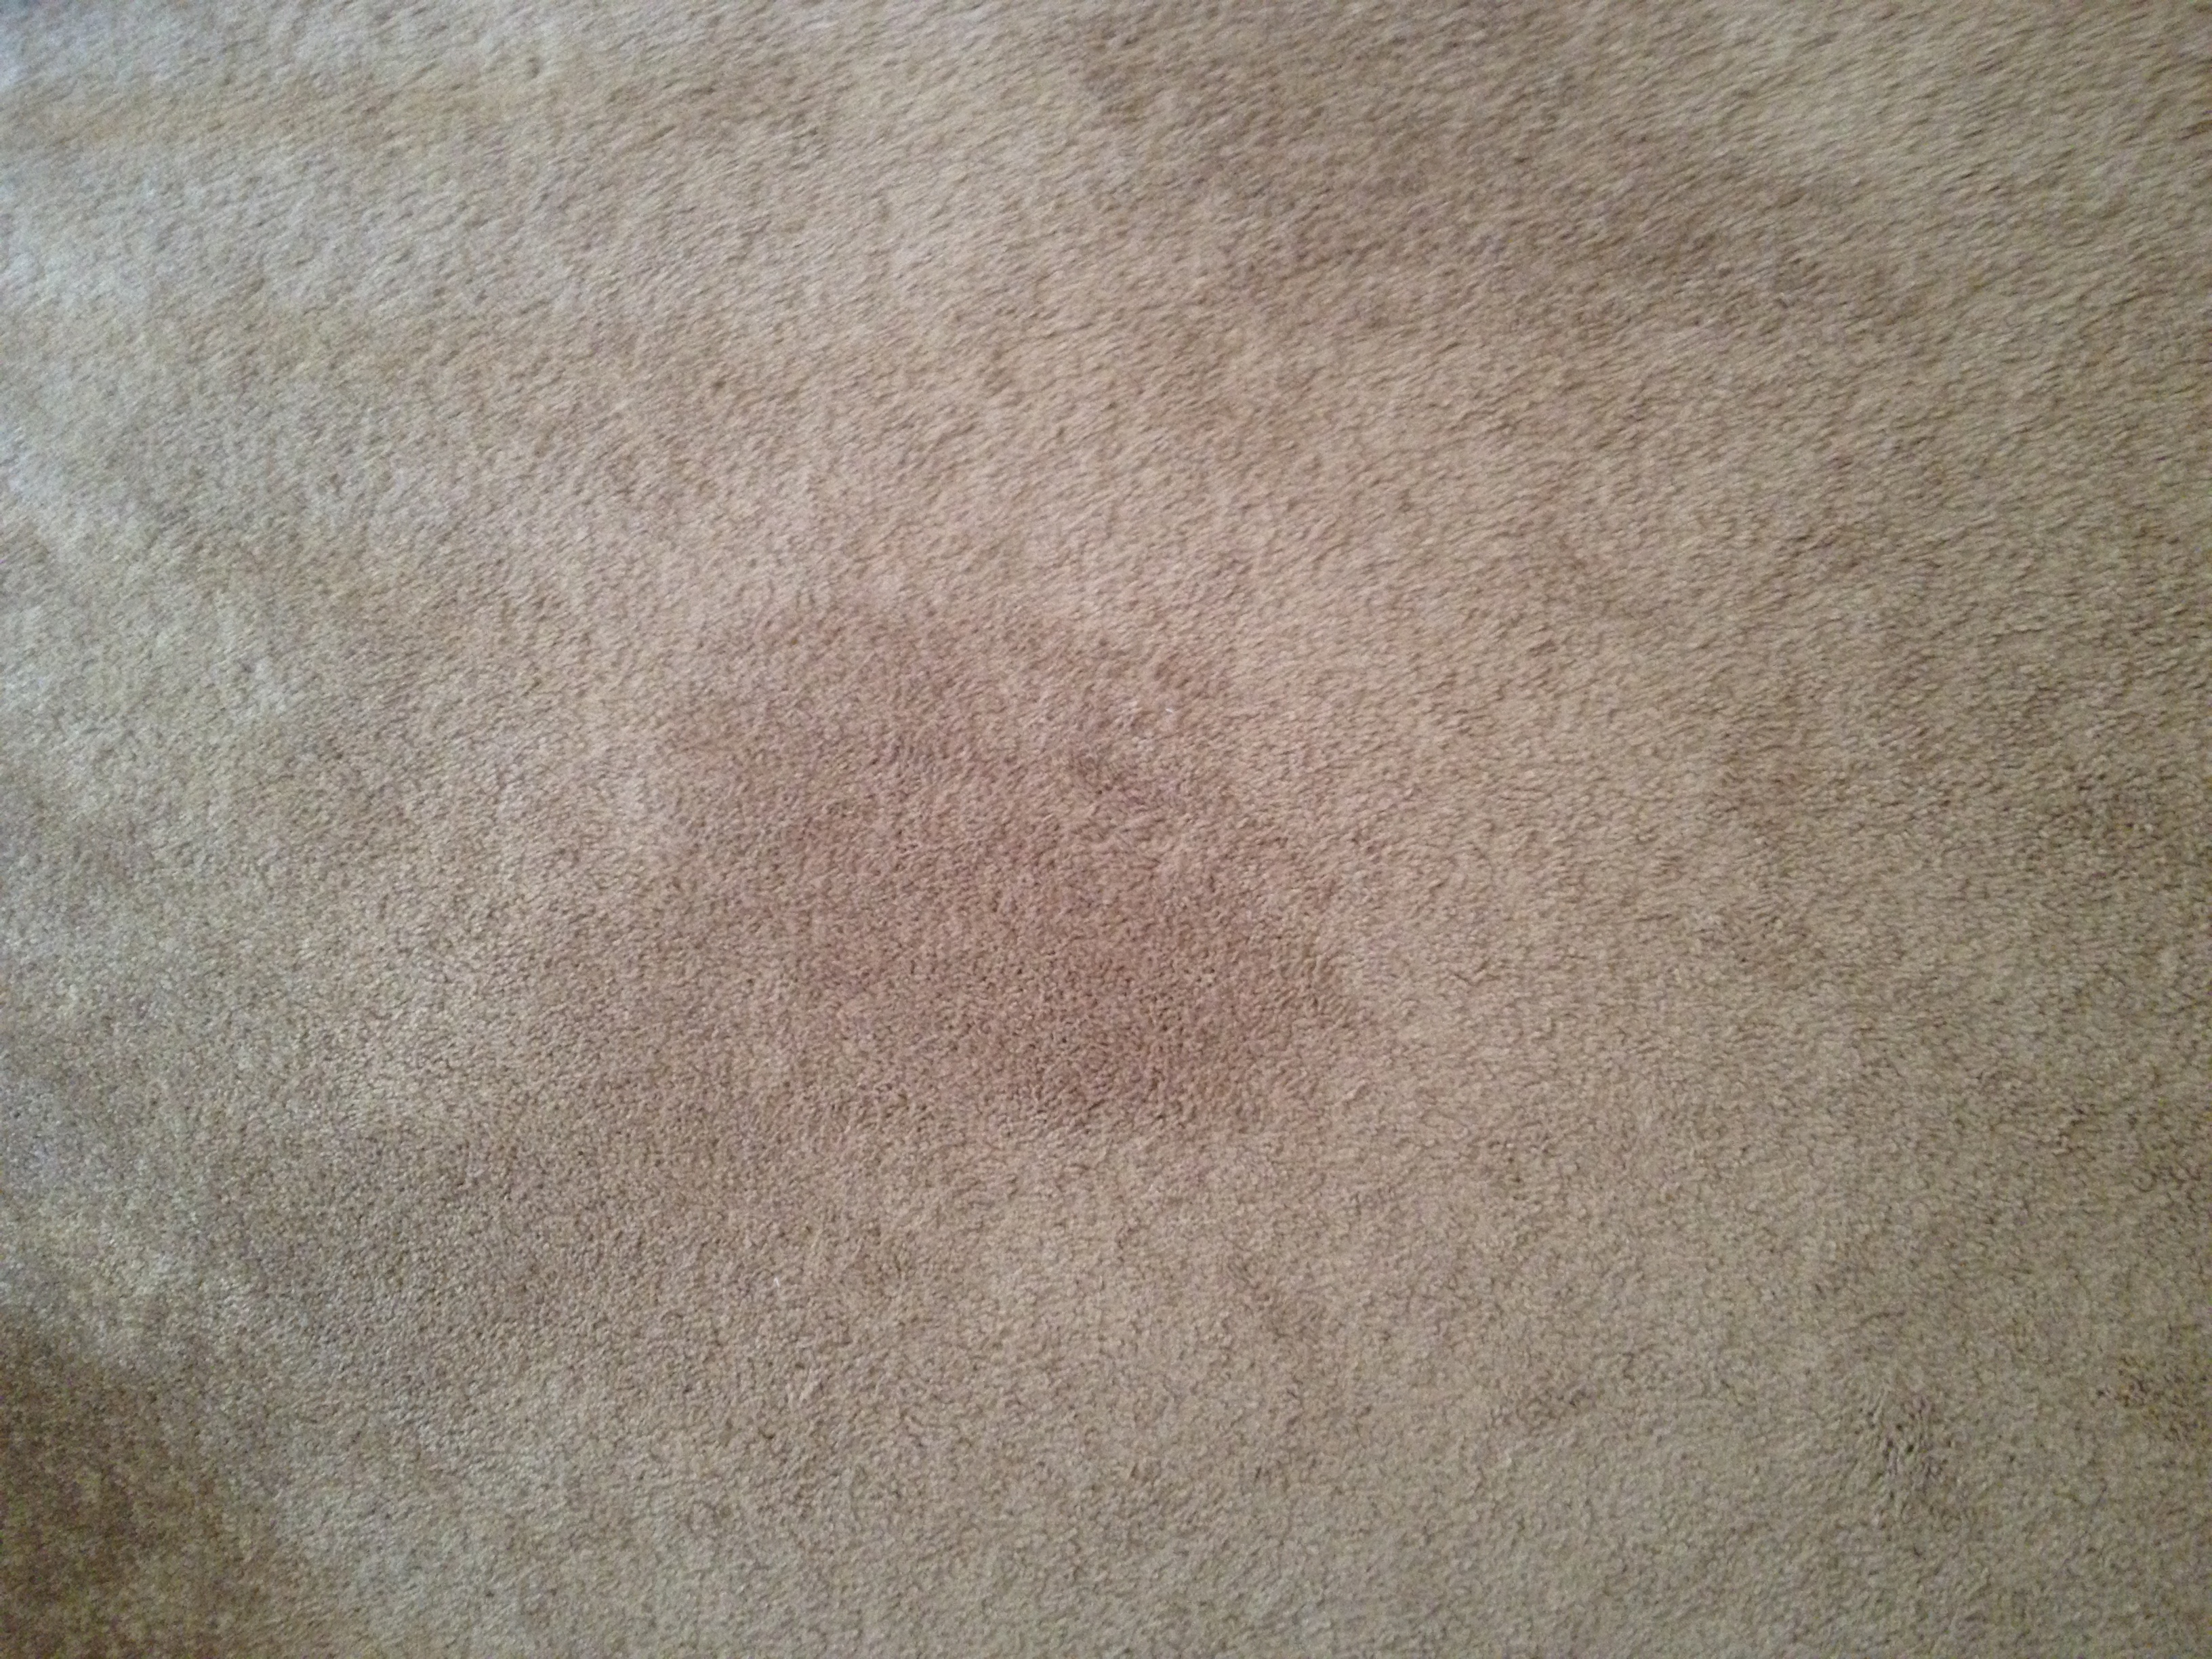 Cleaning Hotel Carpets -Stain